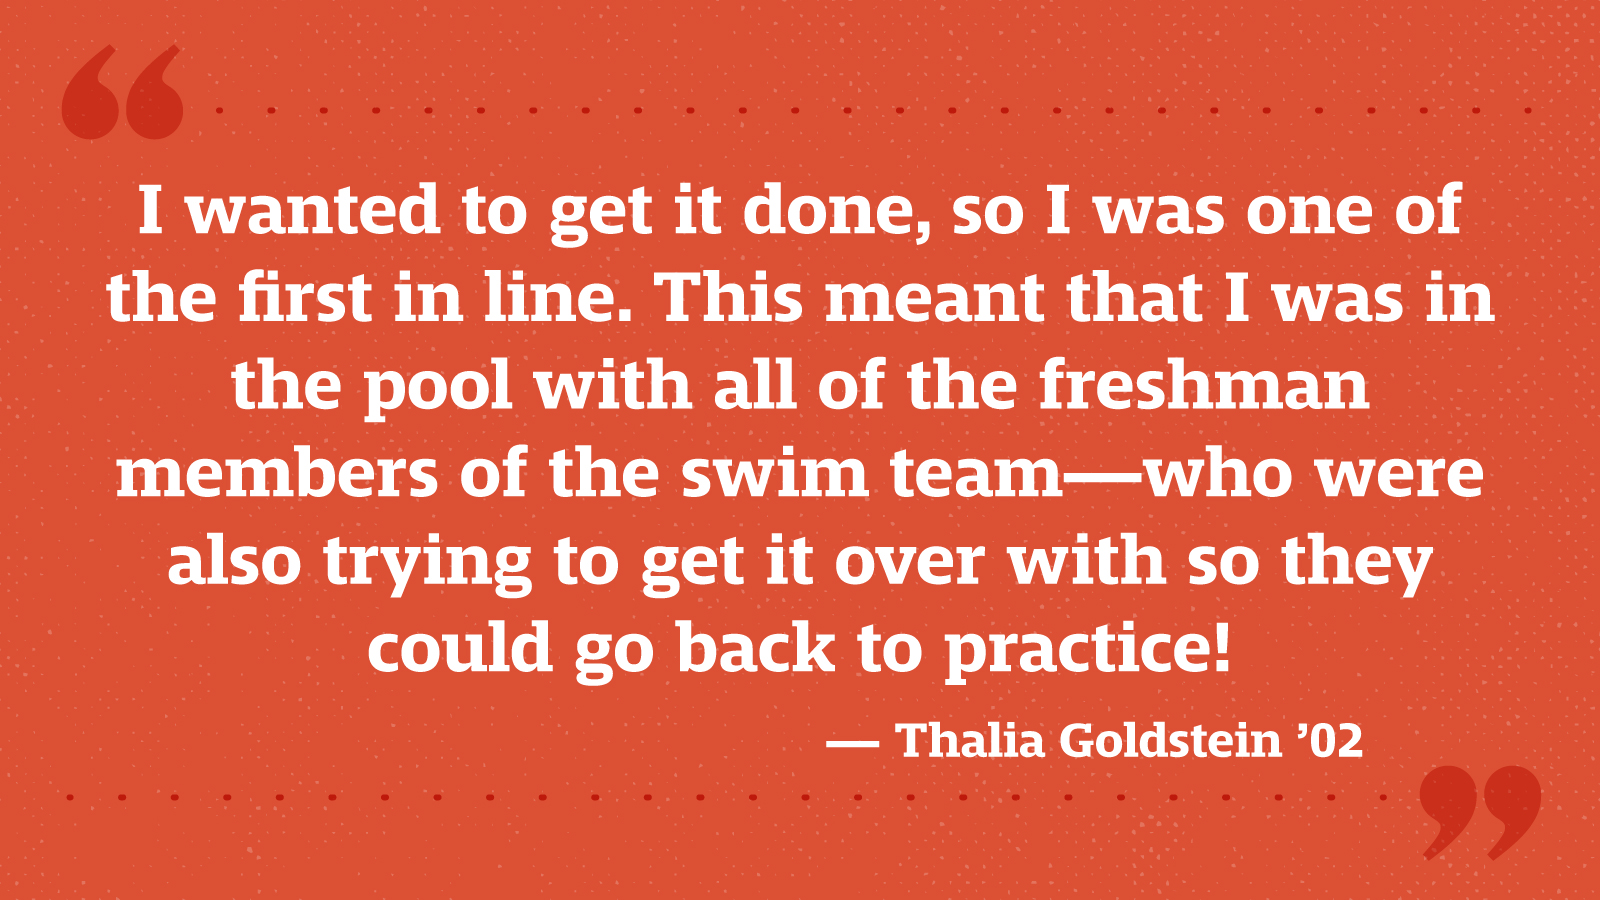 I wanted to get it done, so I was one of the first in line. This meant that I was in the pool with all of the freshman members of the swim team—who were also trying to get it over with so they could go back to practice! — Thalia Goldstein ’02